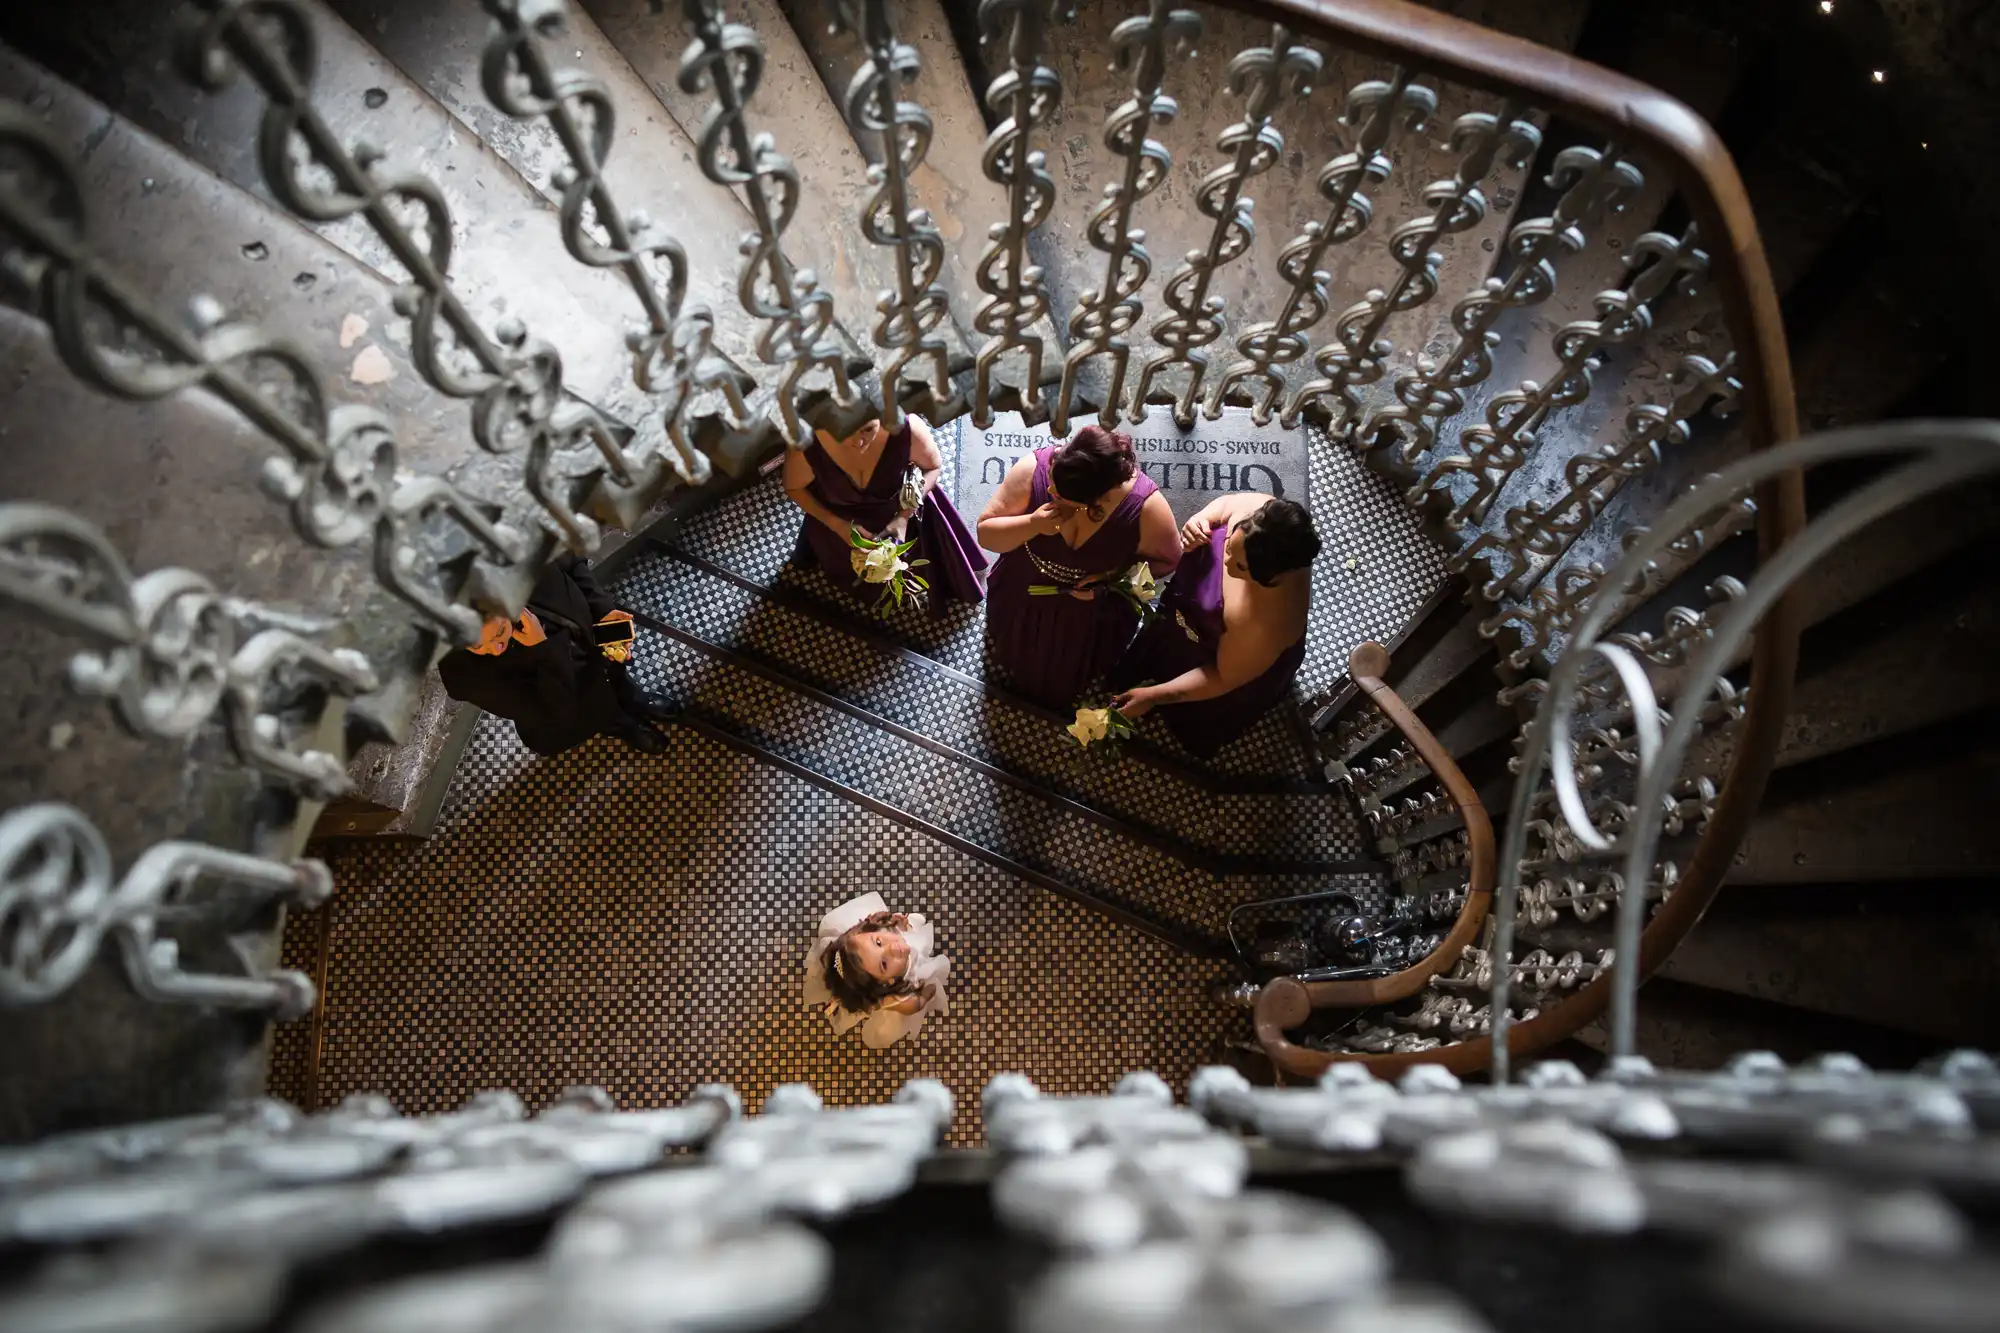 A bride looking up while standing at the bottom of an ornate spiral staircase, surrounded by bridesmaids dressed in purple.